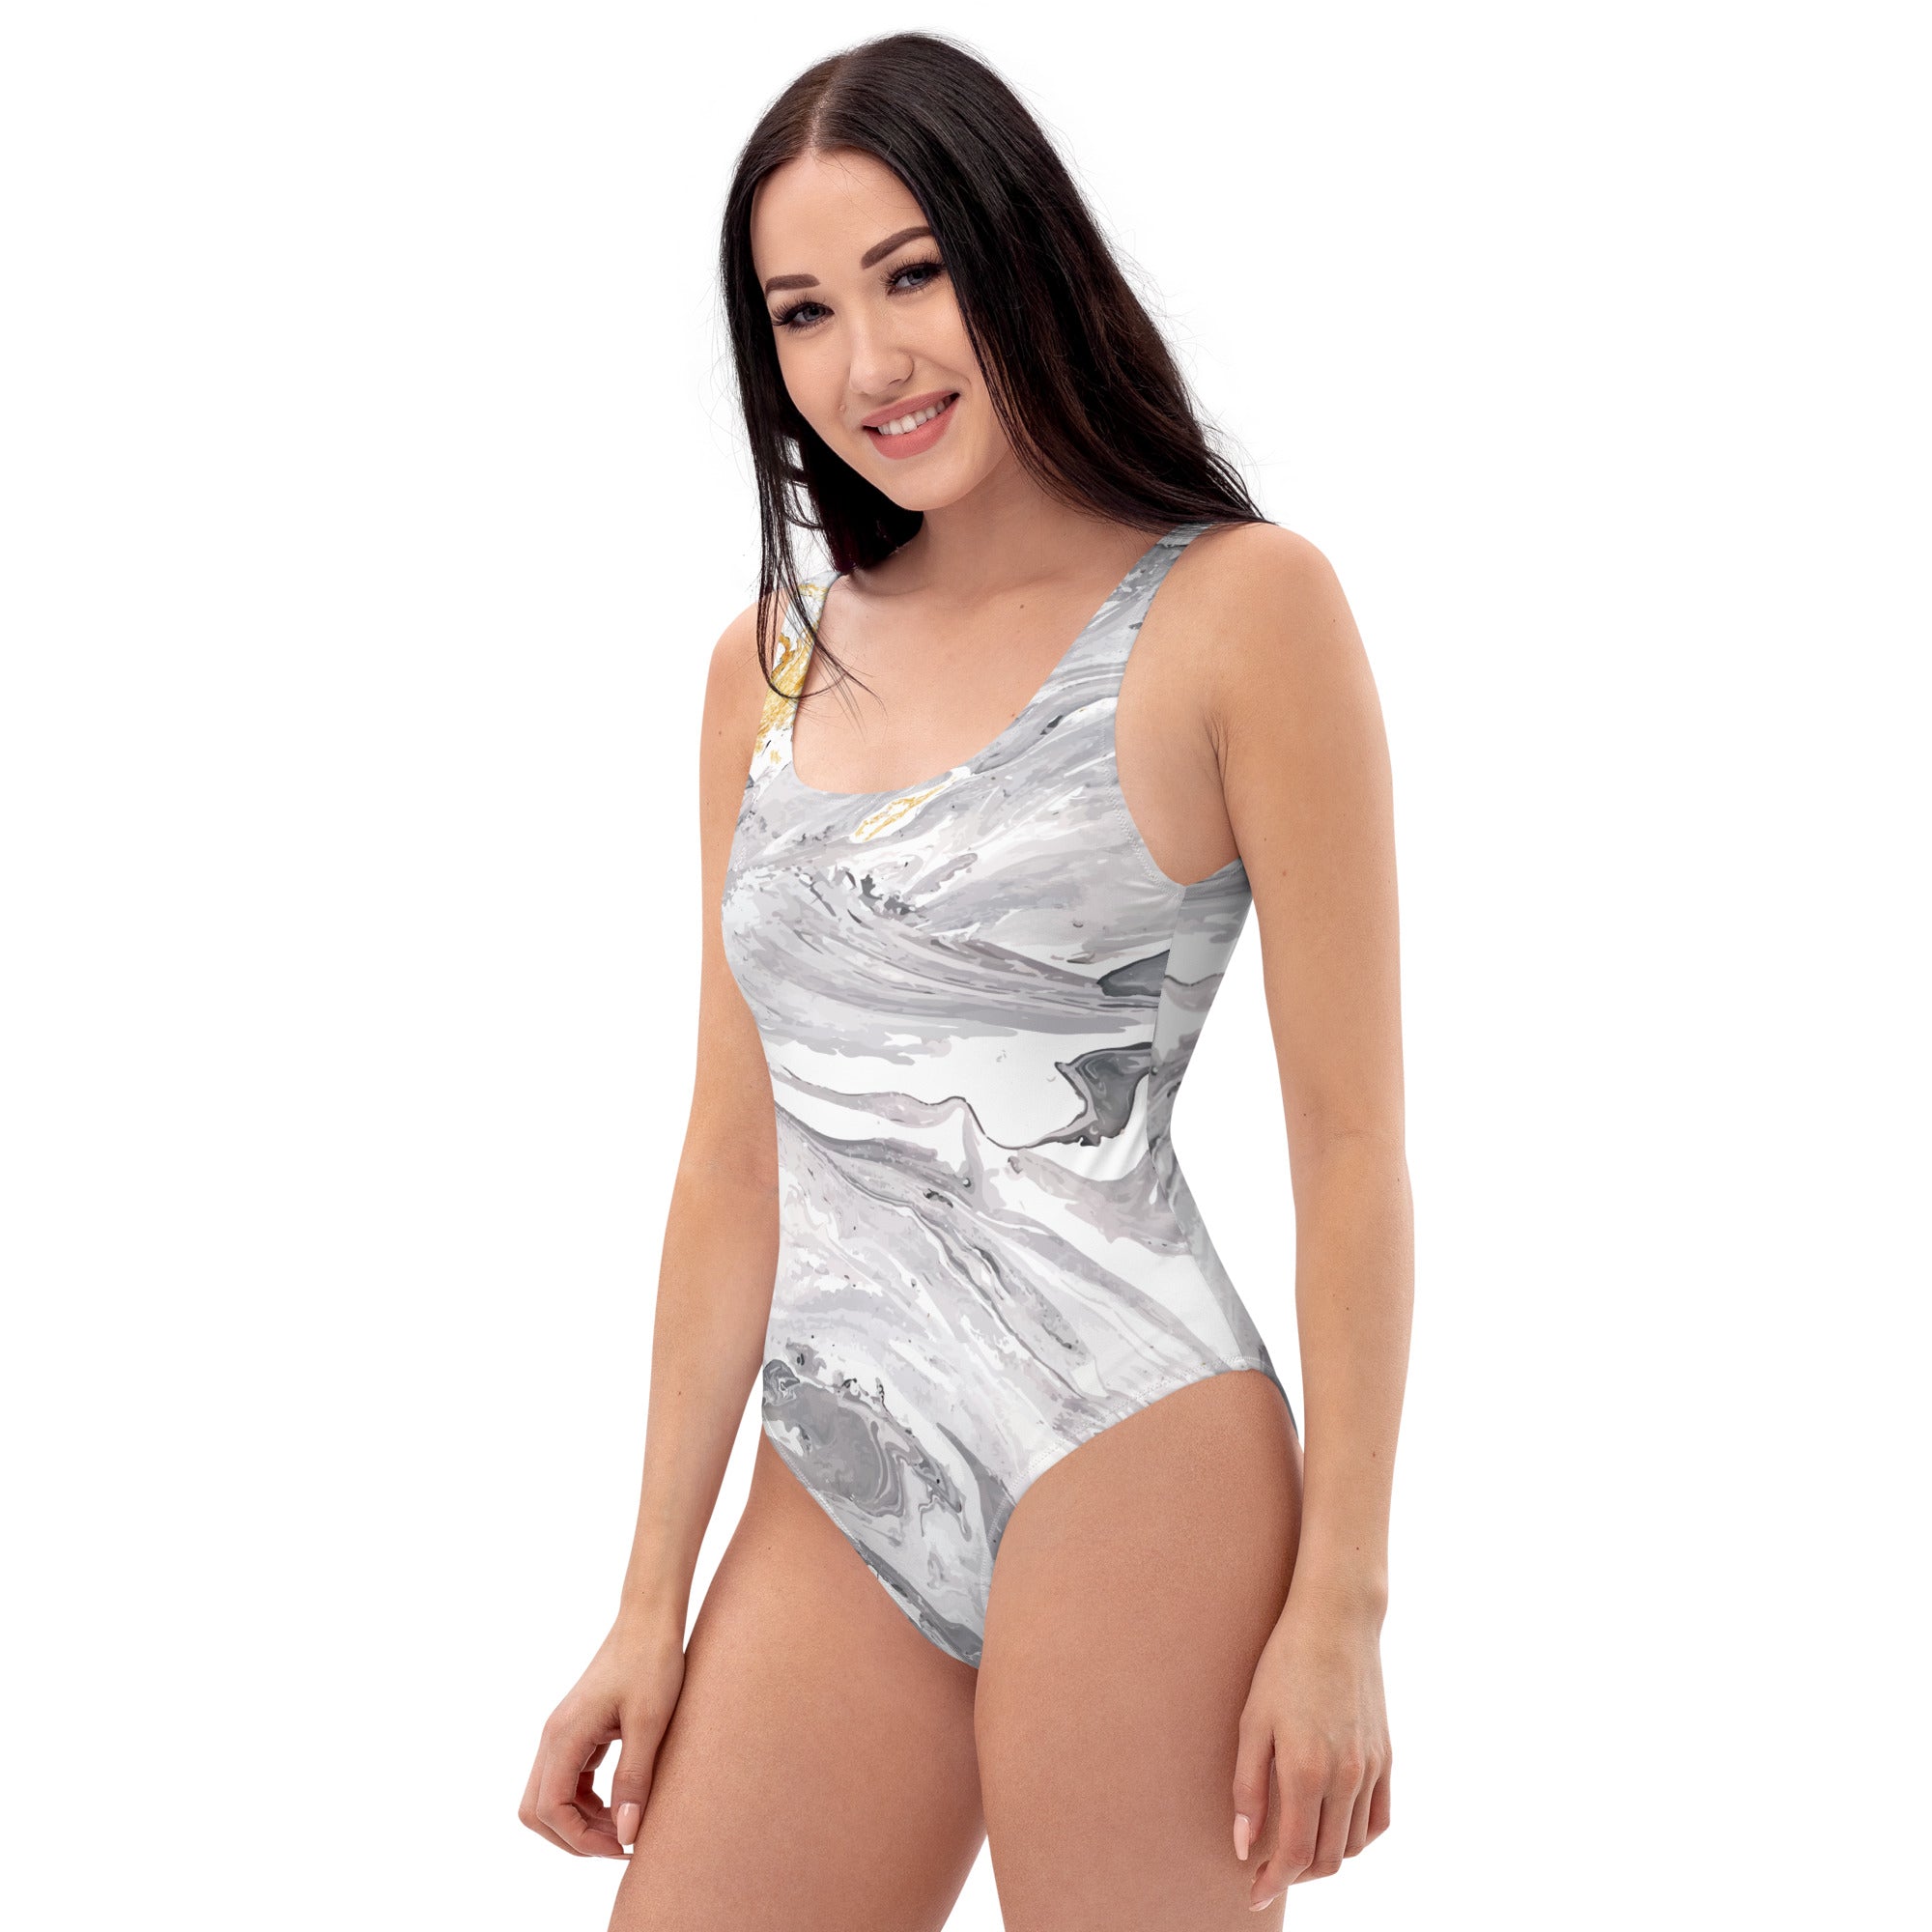 Mixed Marble Arts Women's One-Piece Swimsuit